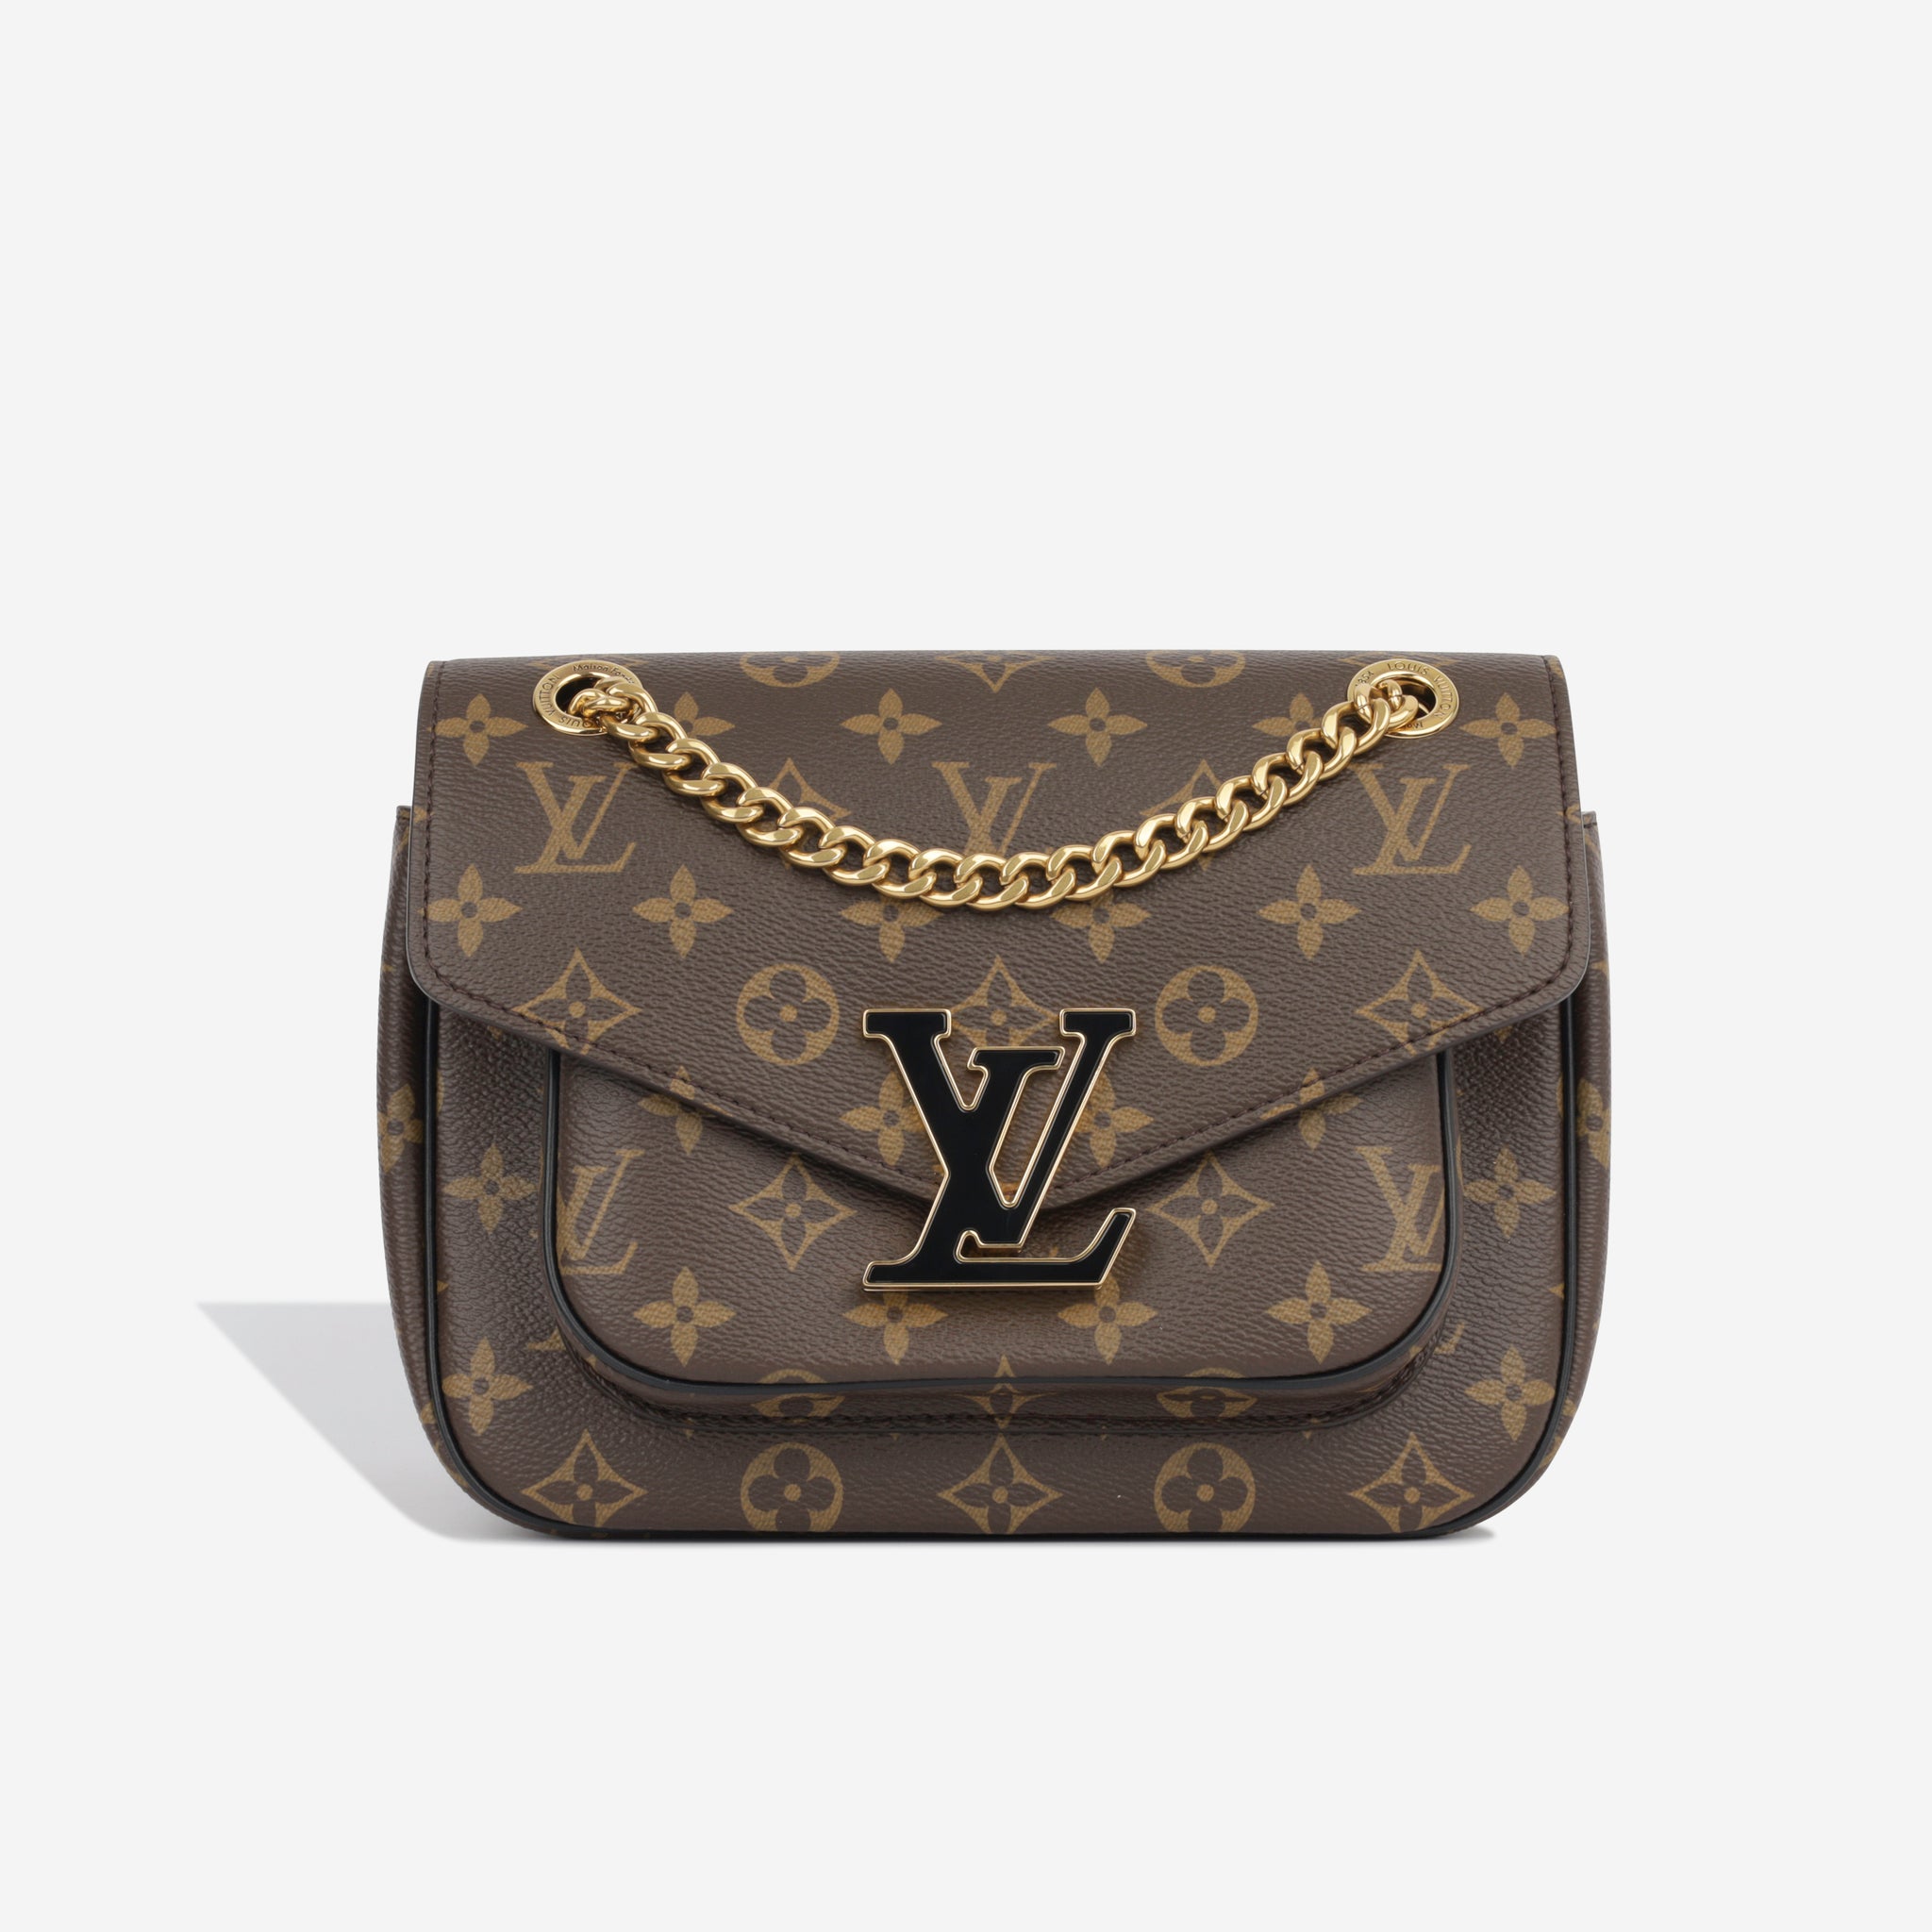 WHAT'S IN MY LOUIS VUITTON PASSY BAG